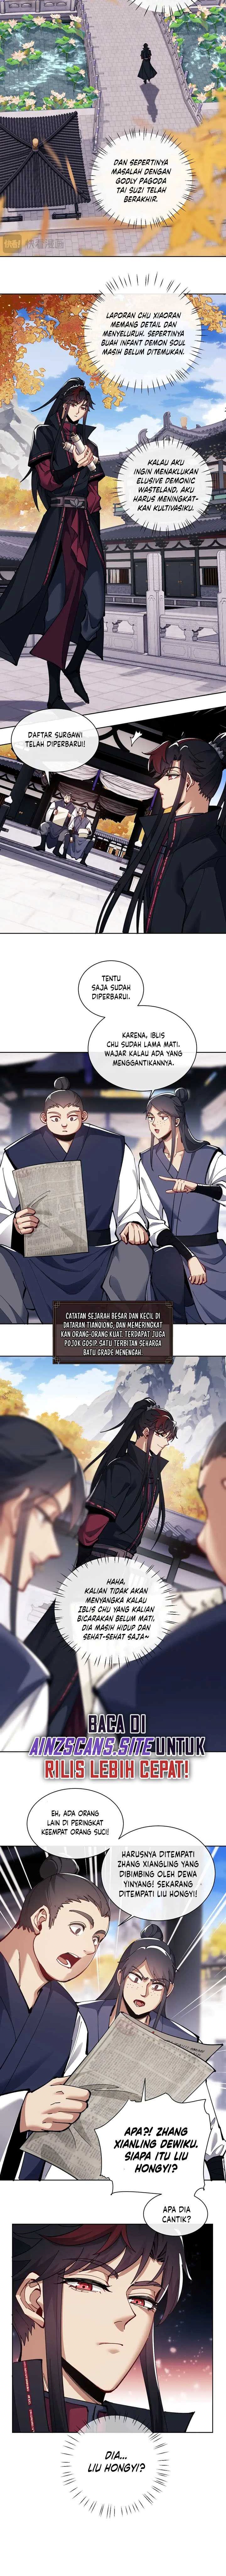 Devious Son Of Heaven Chapter 12 Image 11